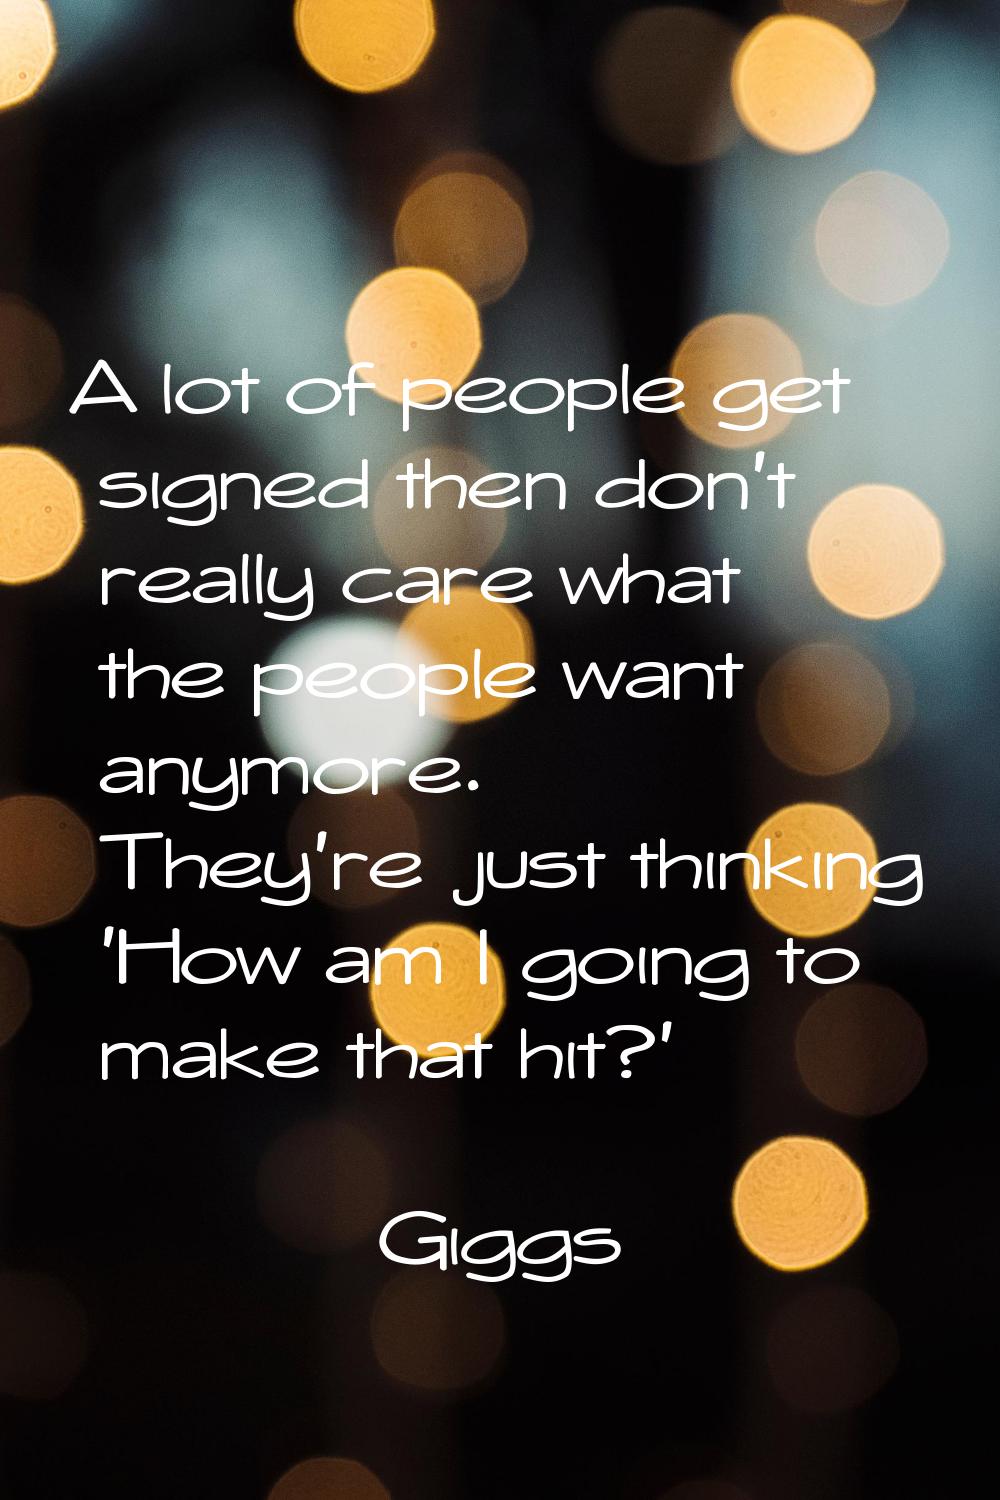 A lot of people get signed then don't really care what the people want anymore. They're just thinki